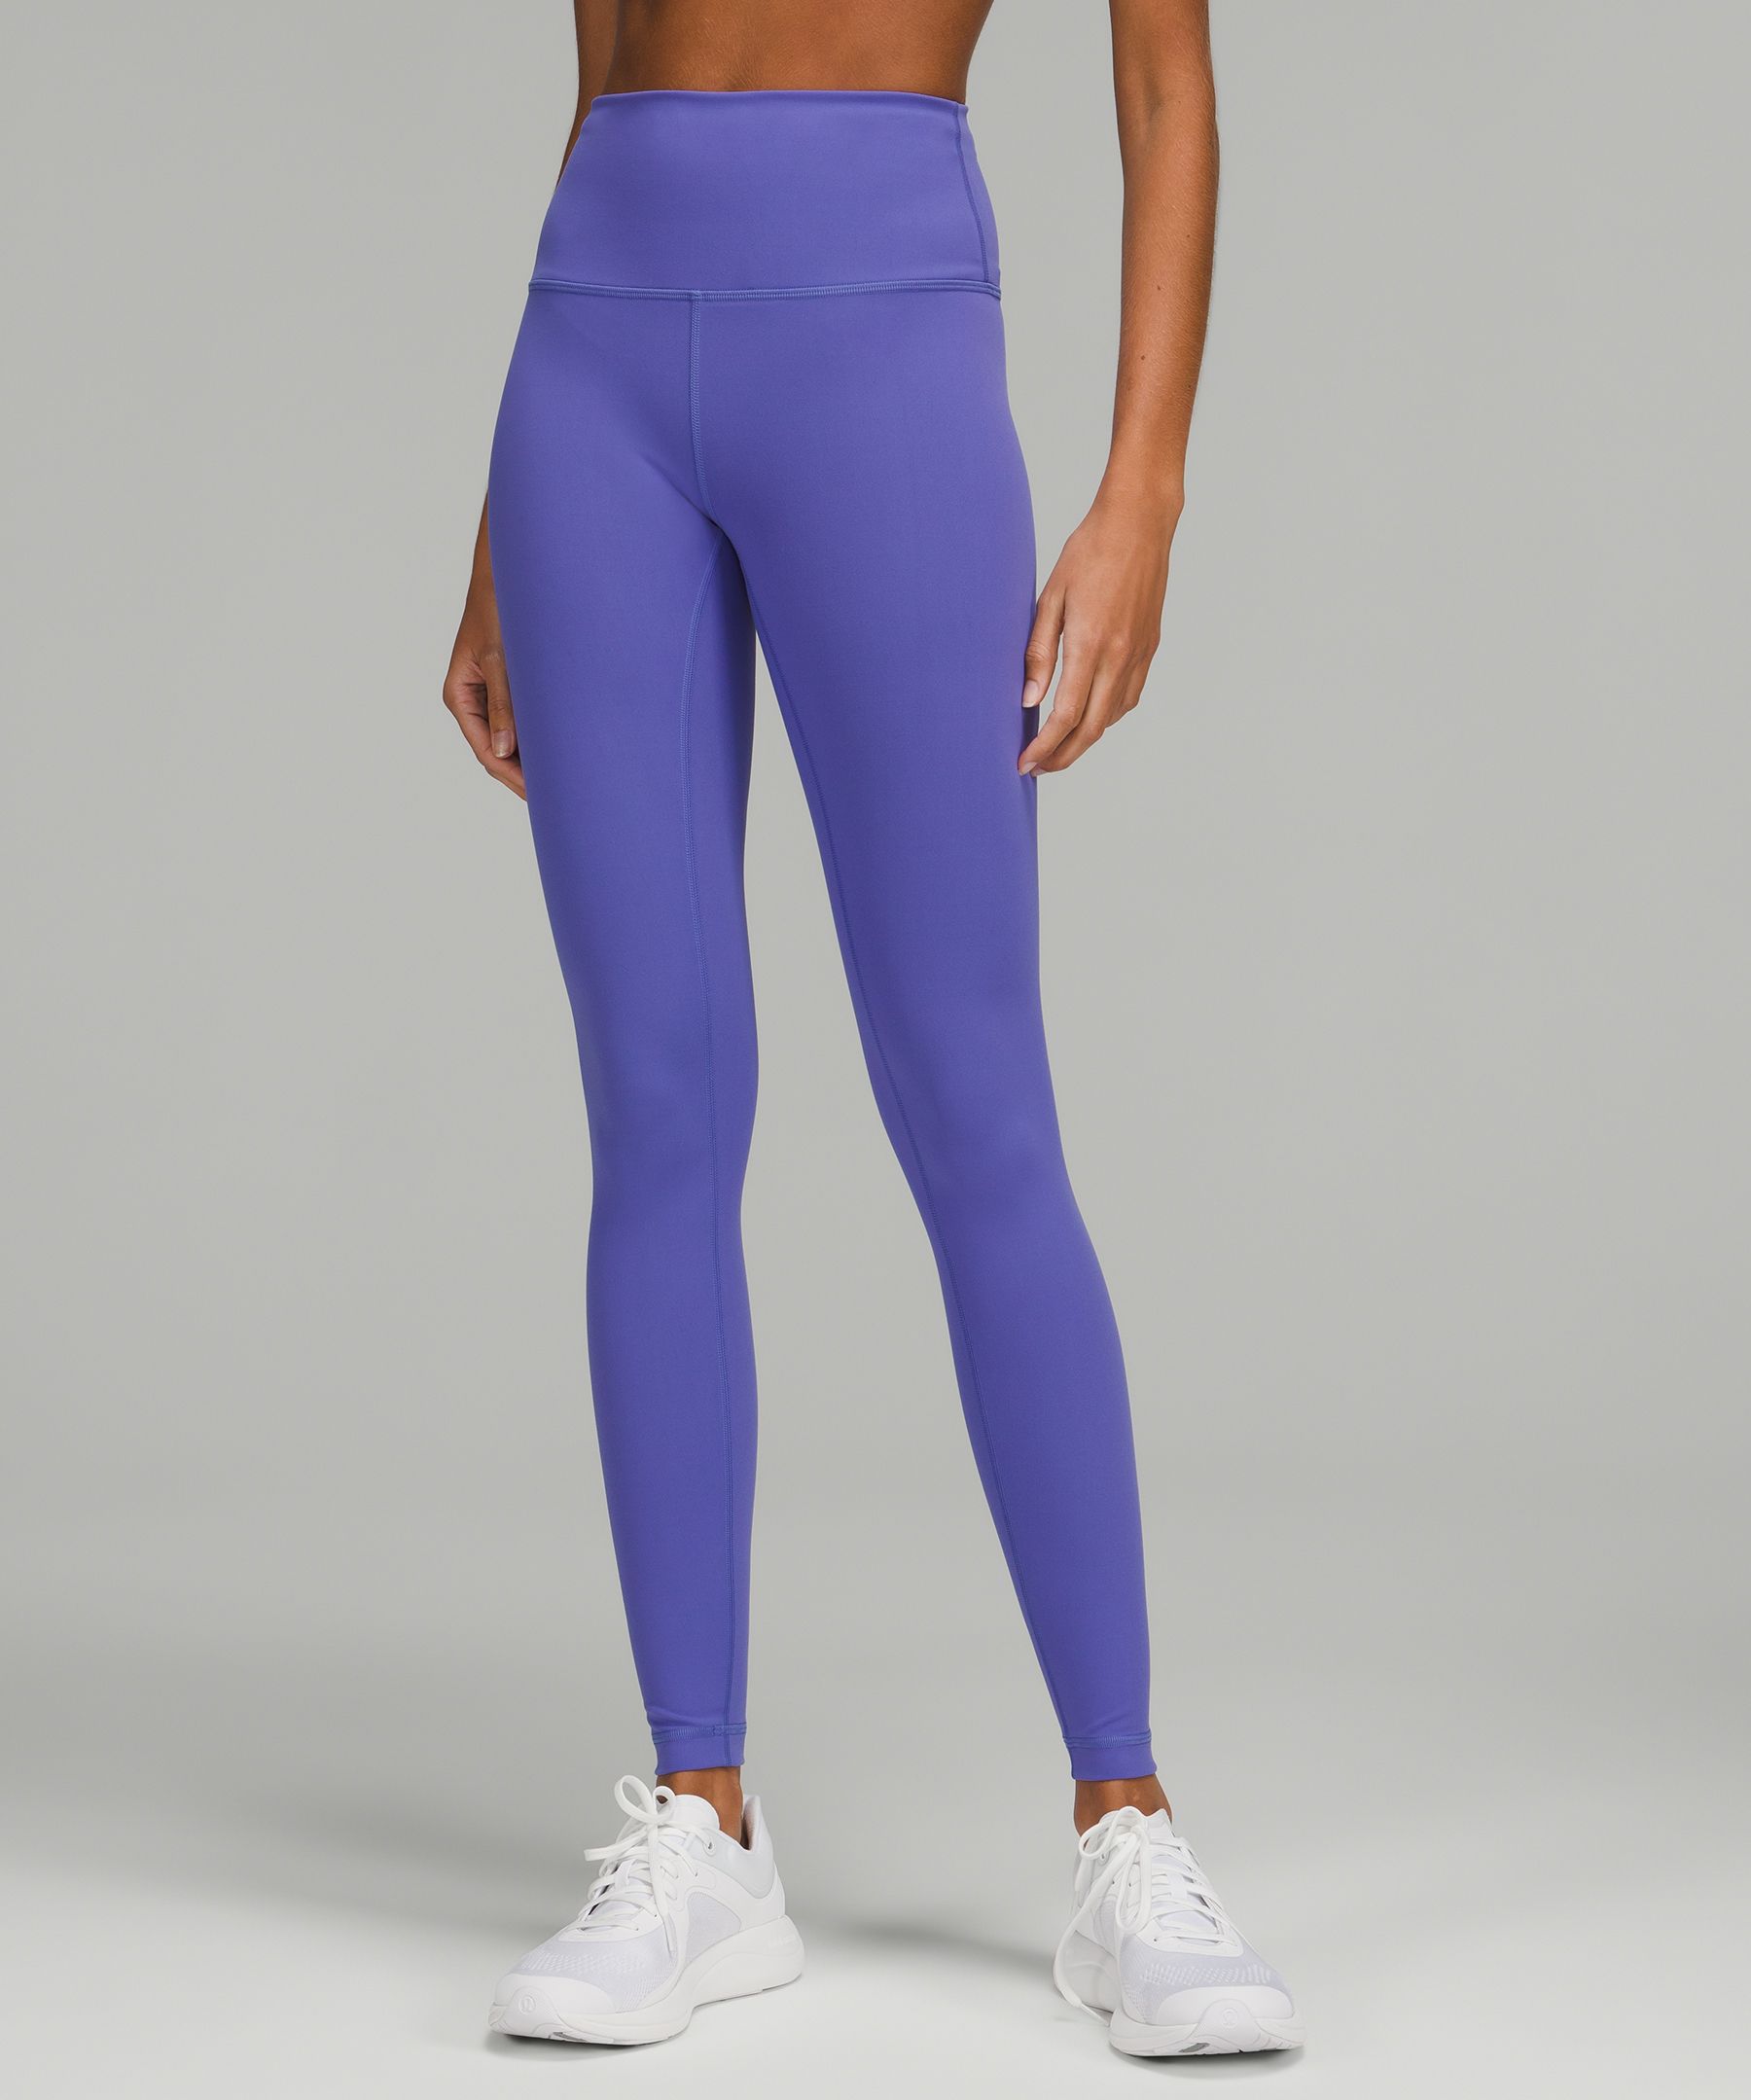 Lululemon Wunder Train High-rise Tights 28 In Charged Indigo